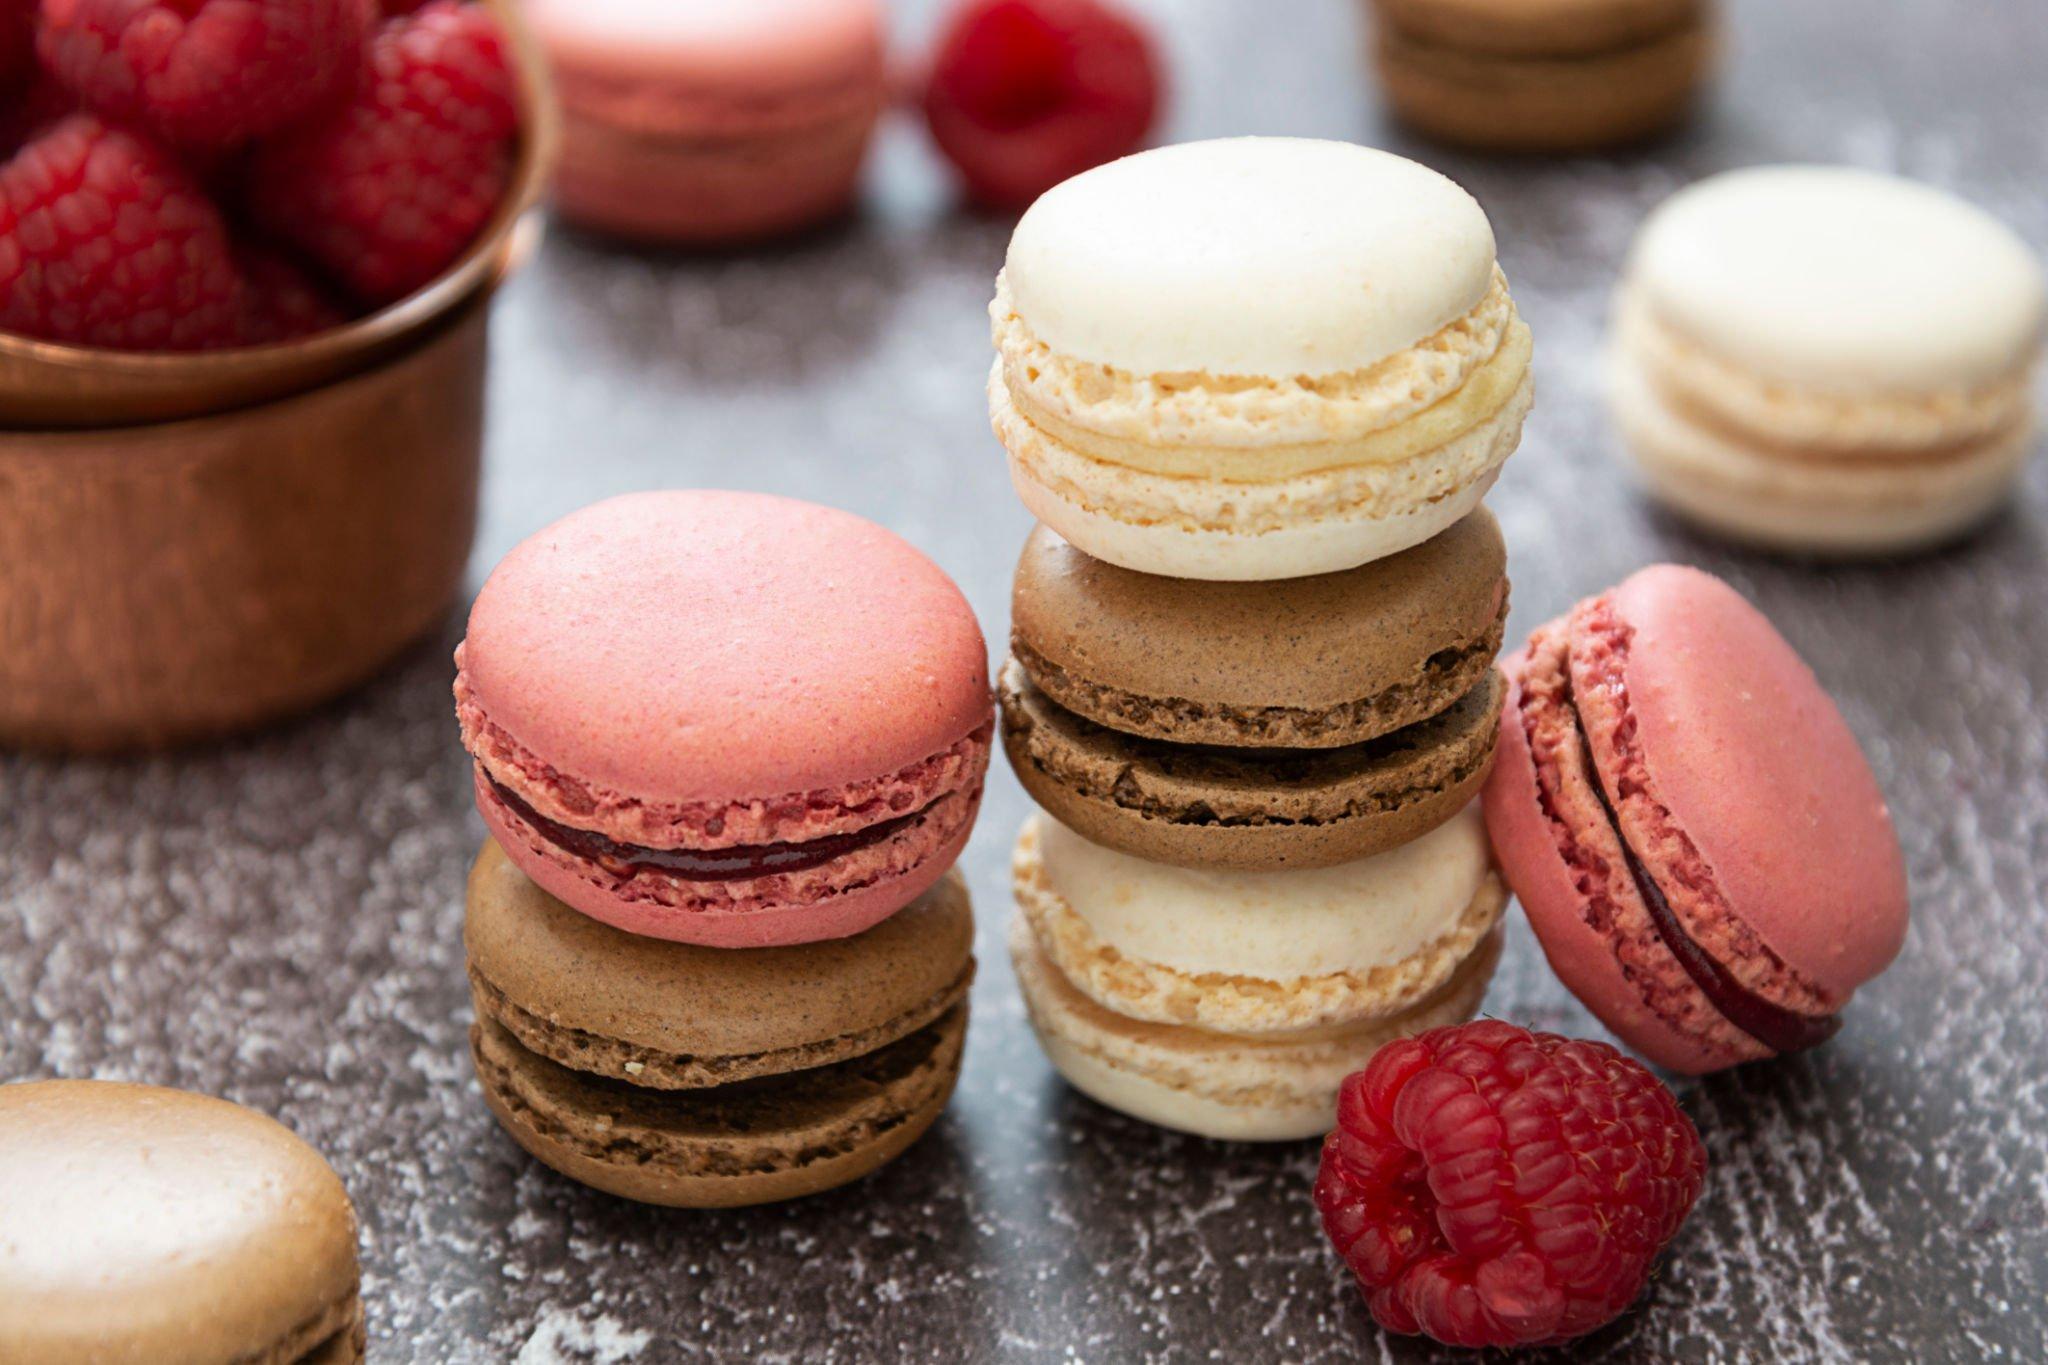 Macaron is a cookie or pastry